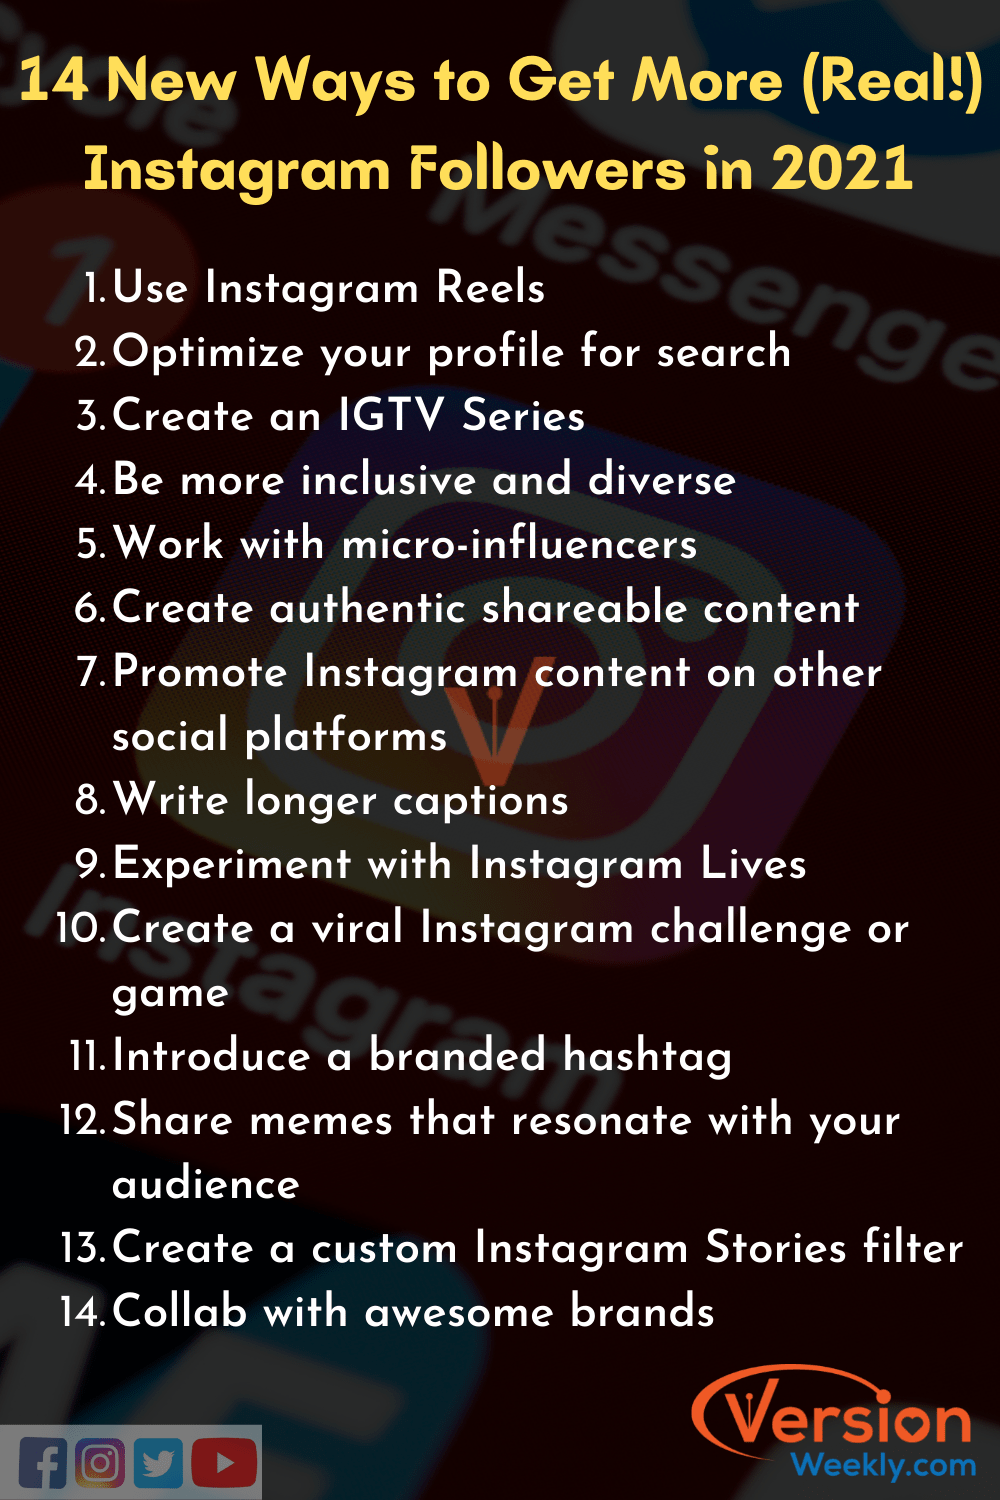 14 New Ways to Get More (Real!) Instagram Followers in 2021